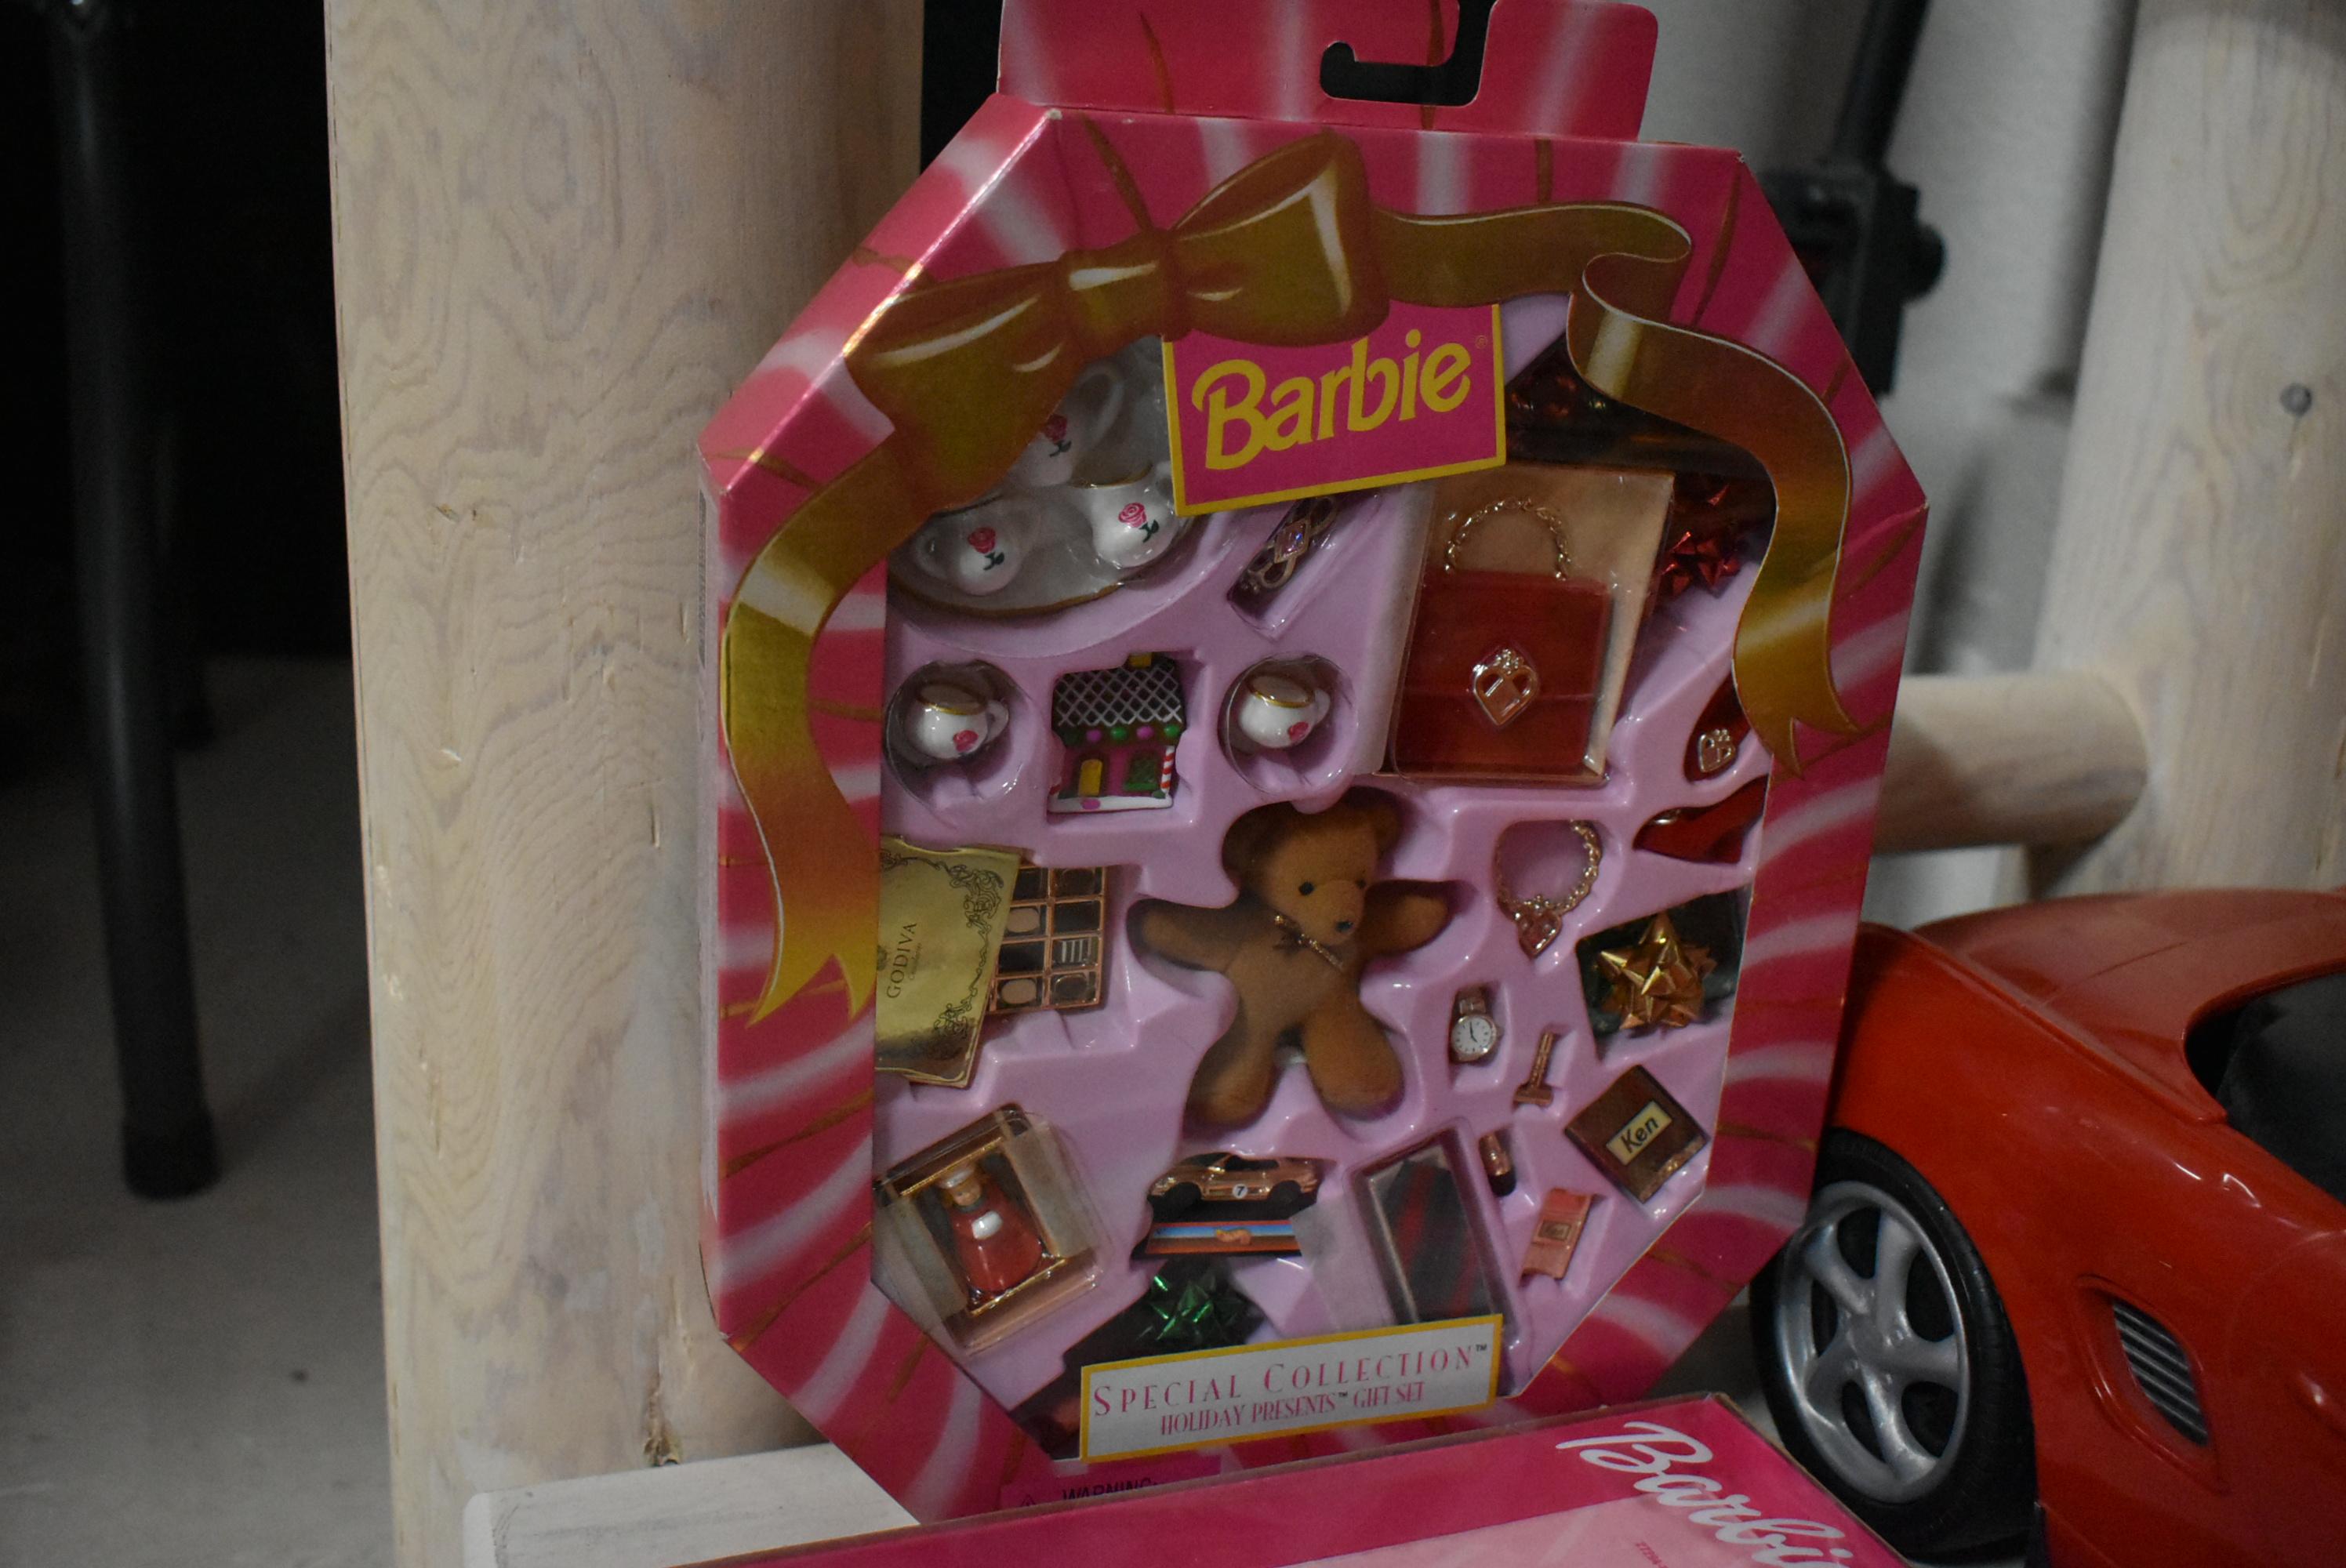 BARBIE CLOTHING & ACCESSORIES!!!